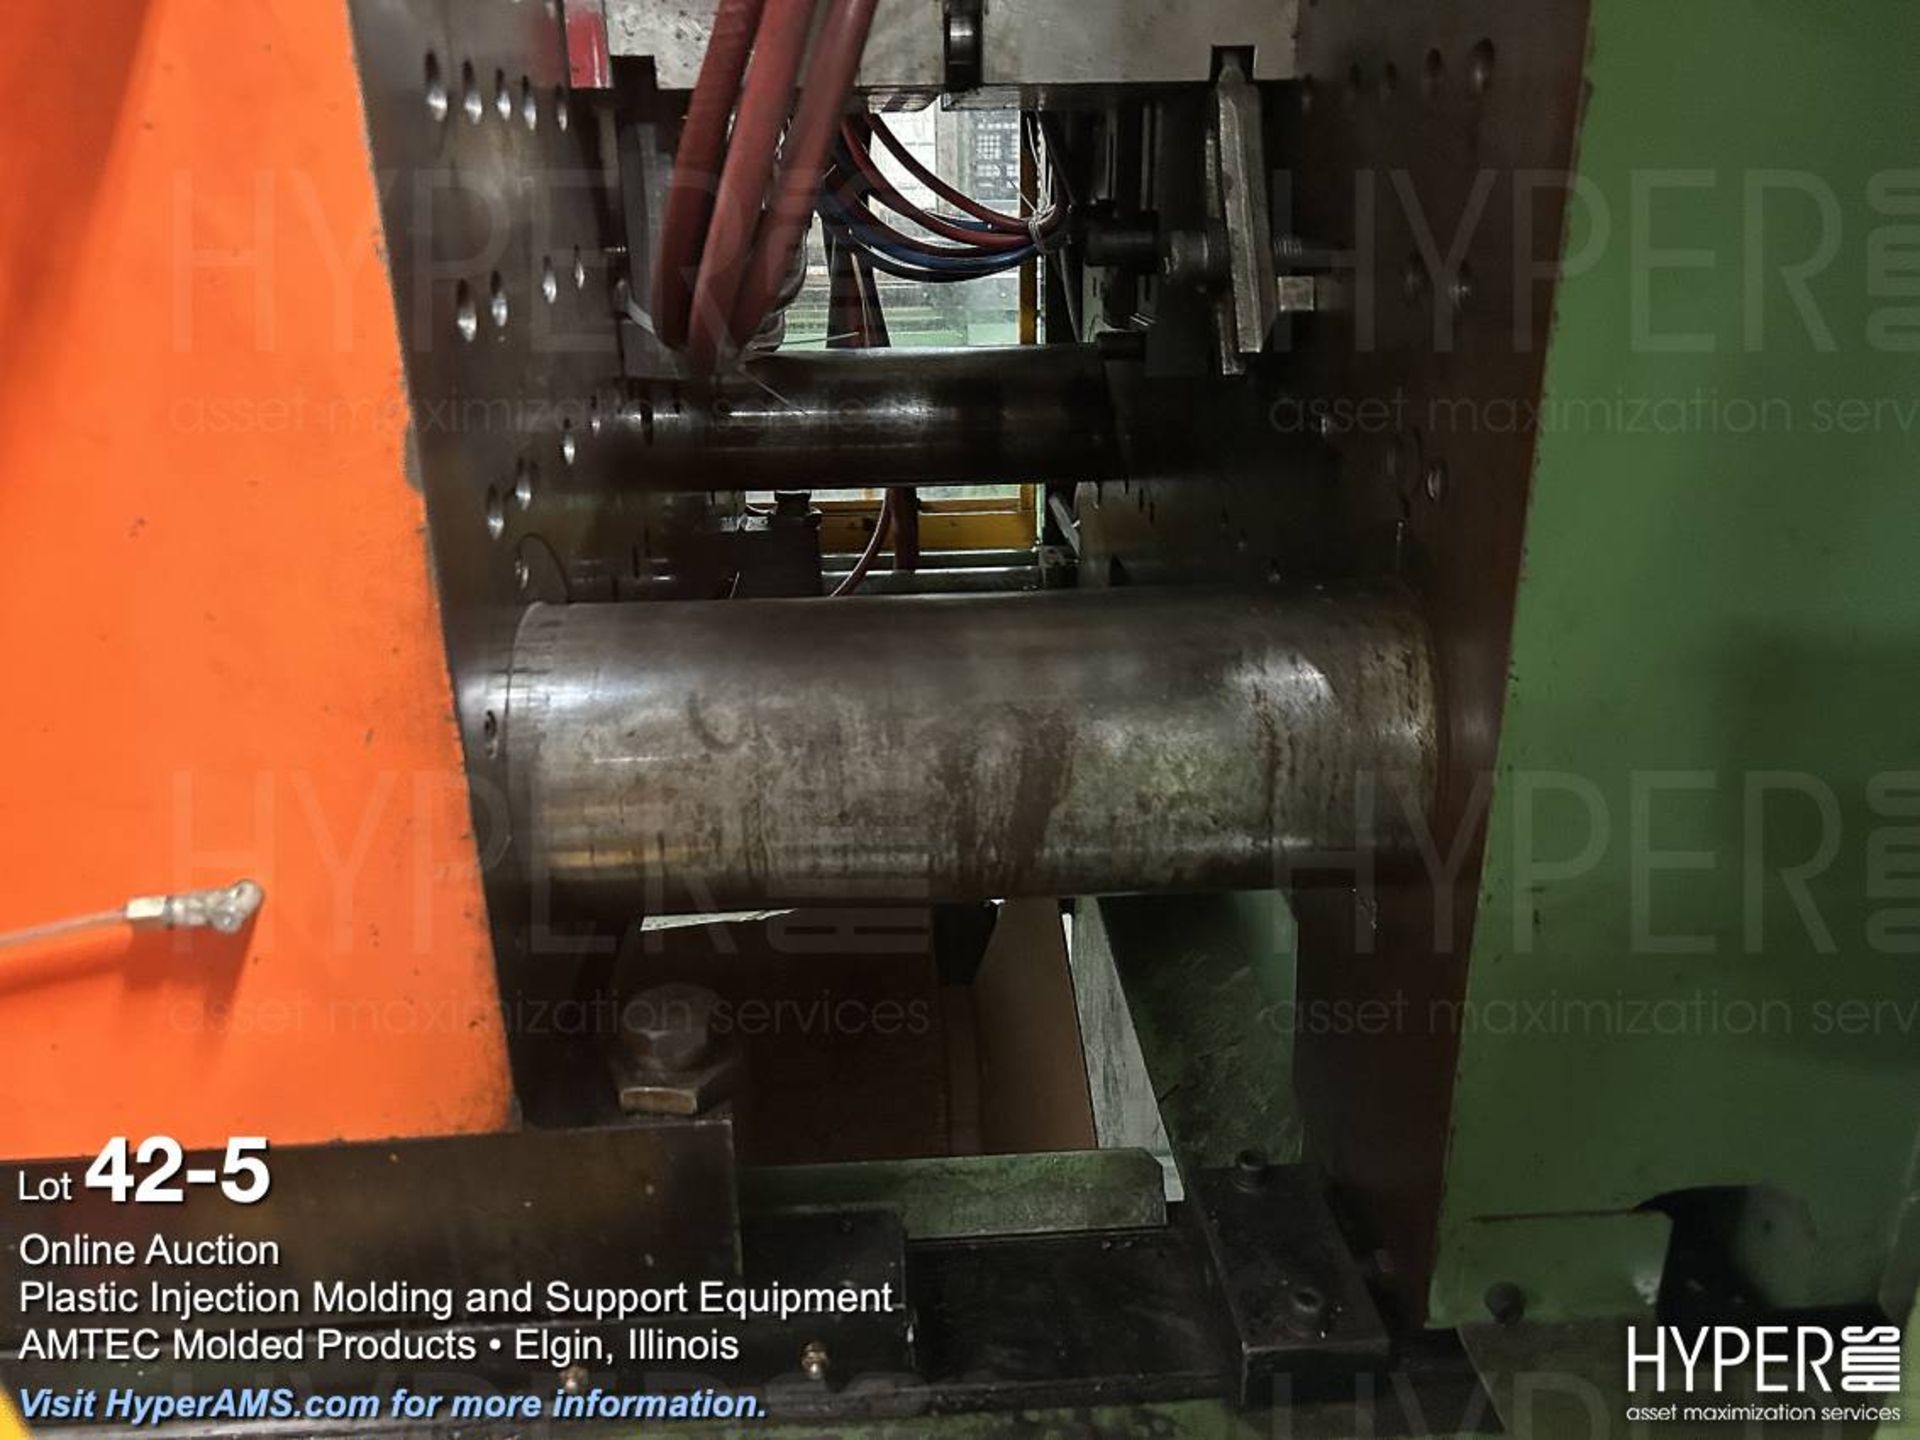 Engel ES2050/400AH toggle clamp plastic injection molding machine - Image 5 of 28